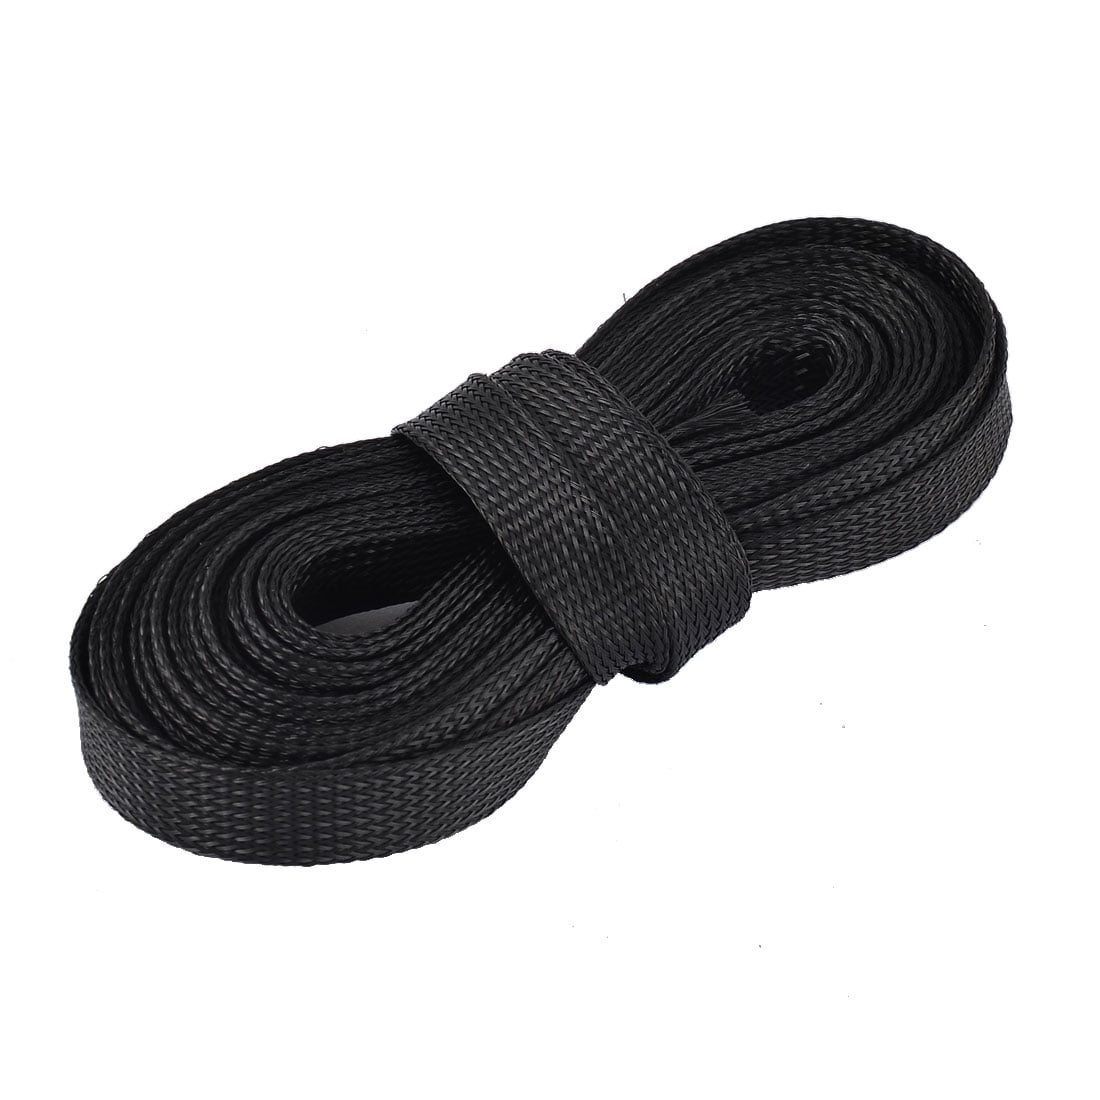 DealMux 20Ft Long 22mm Wide Nylon Braided Elastic Expandable Sleeving Cable Harness Black 